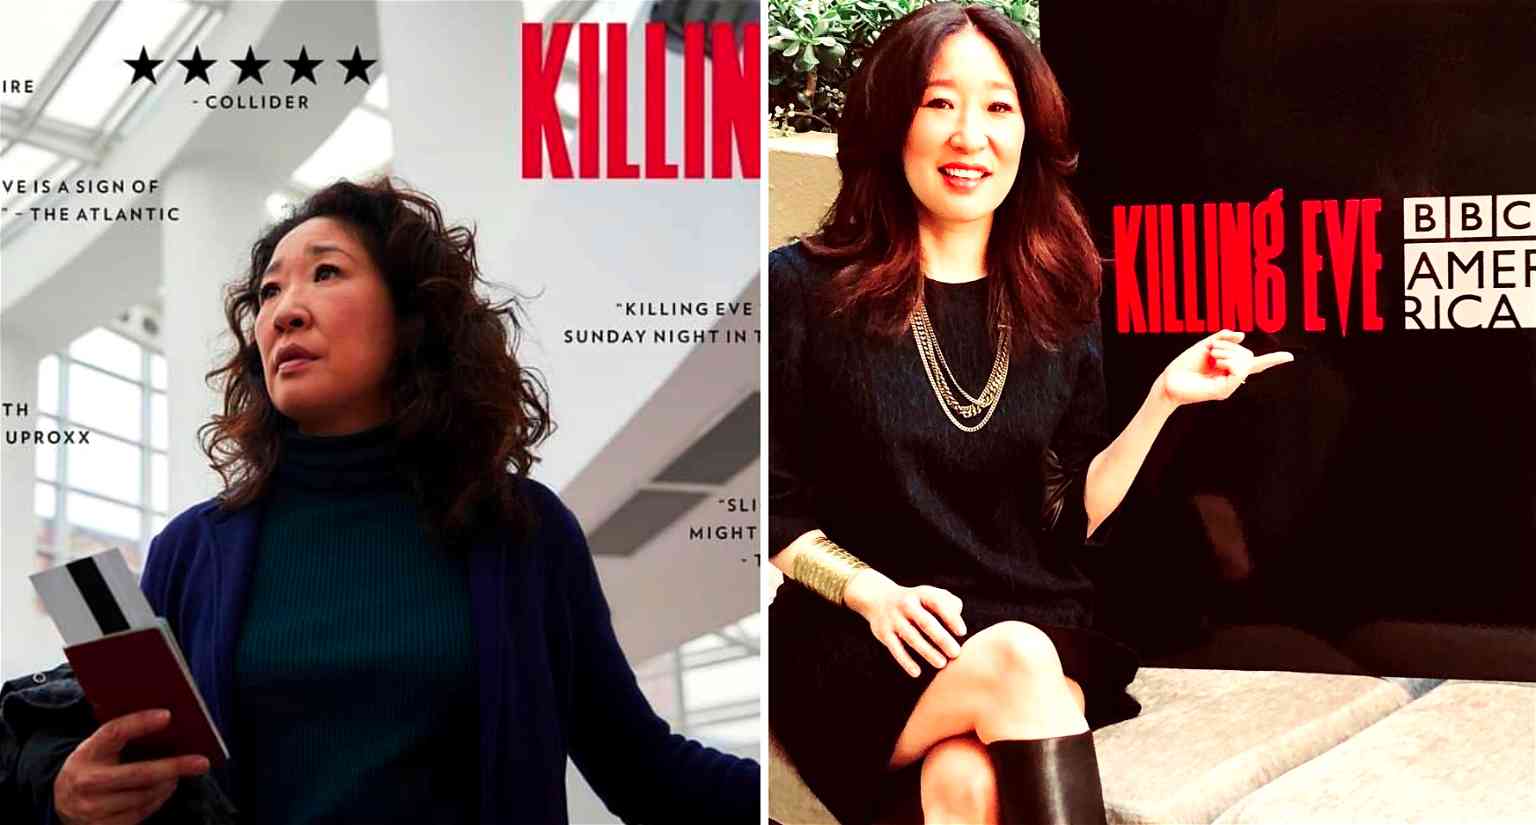 Sandra Oh is the First Asian to be Nominated for Lead Actress at the Emmys